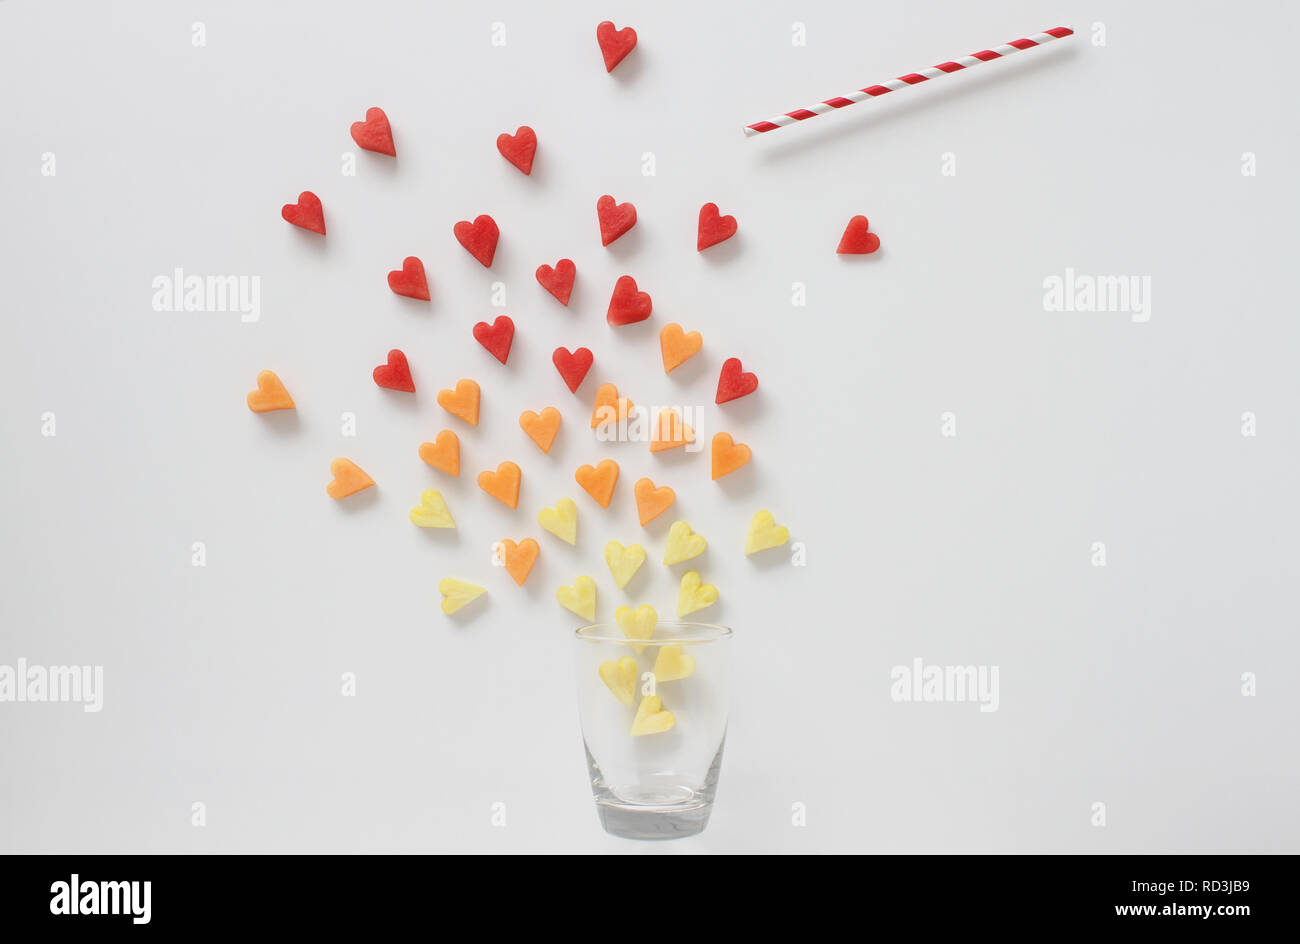 Heart shaped fruit and drinking straw floating out of a glass Stock Photo